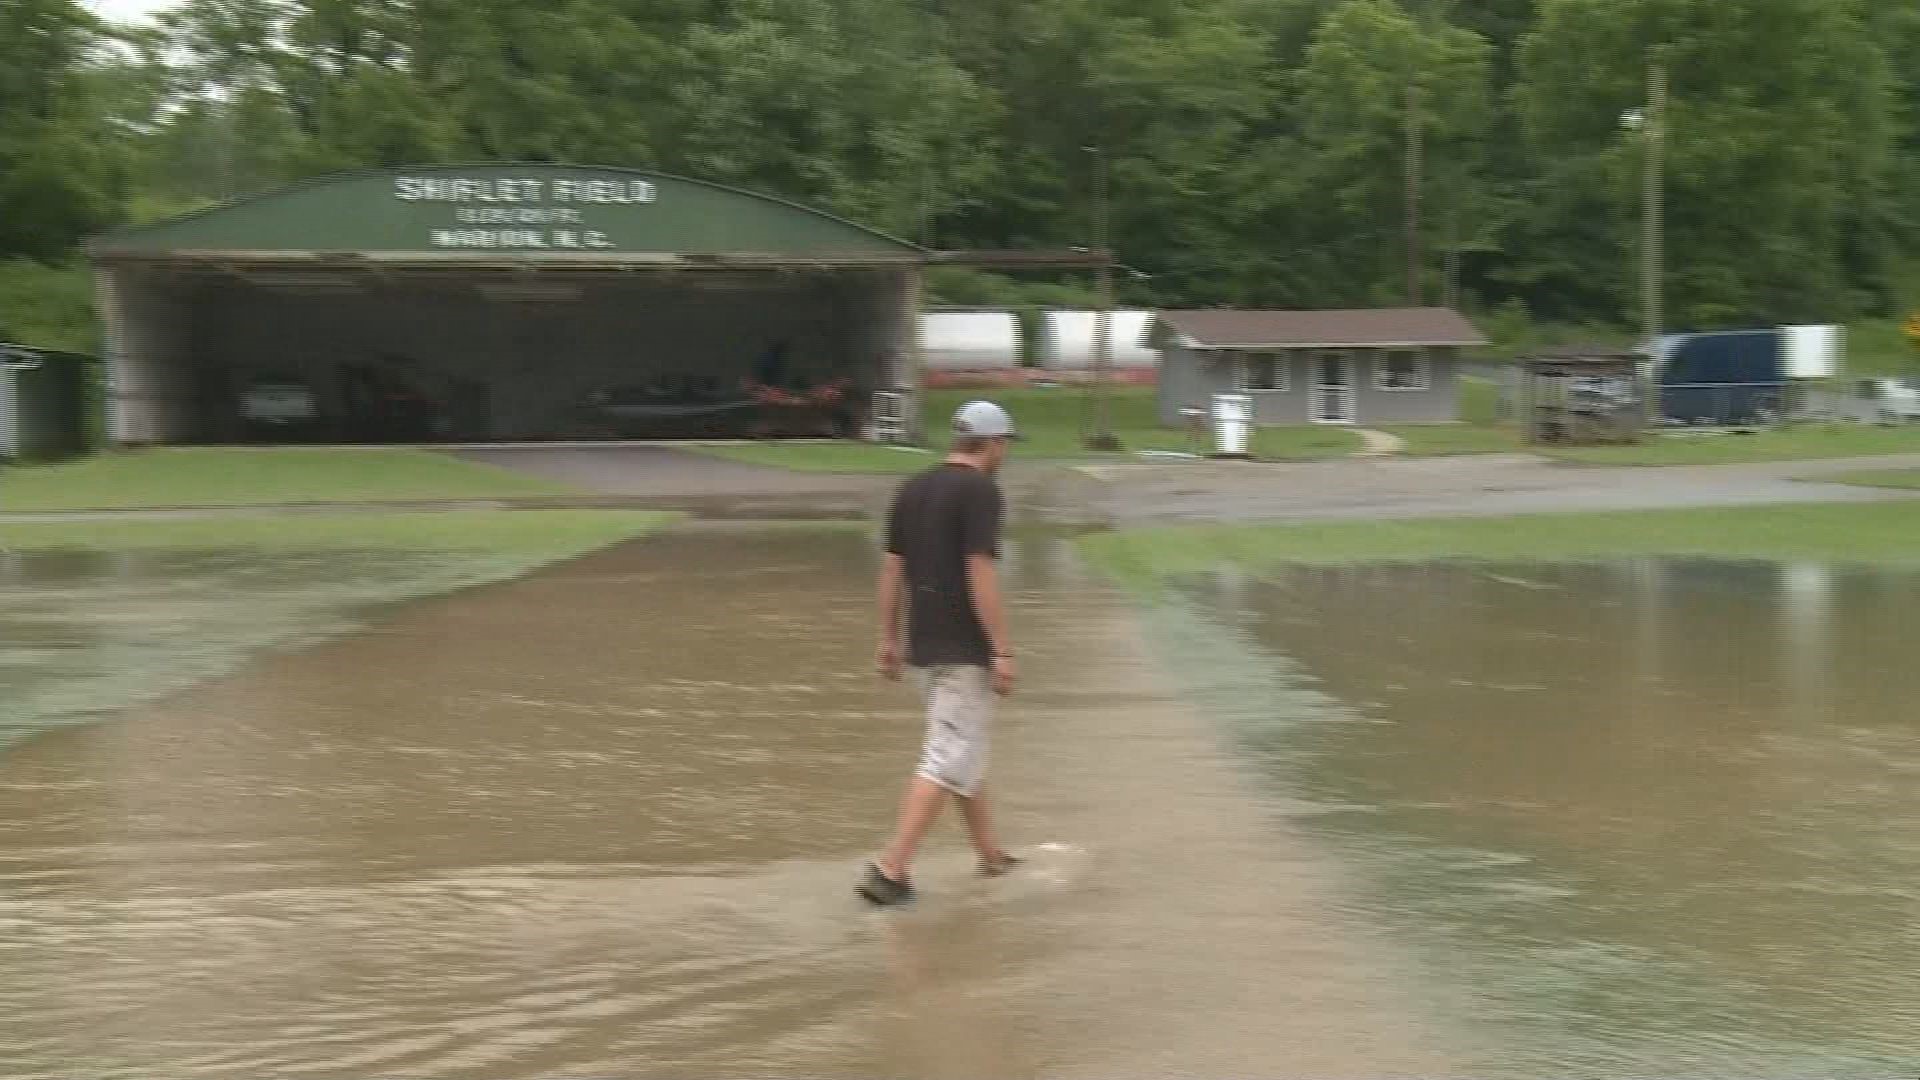 McDowell County Cleaning Up After Flooding